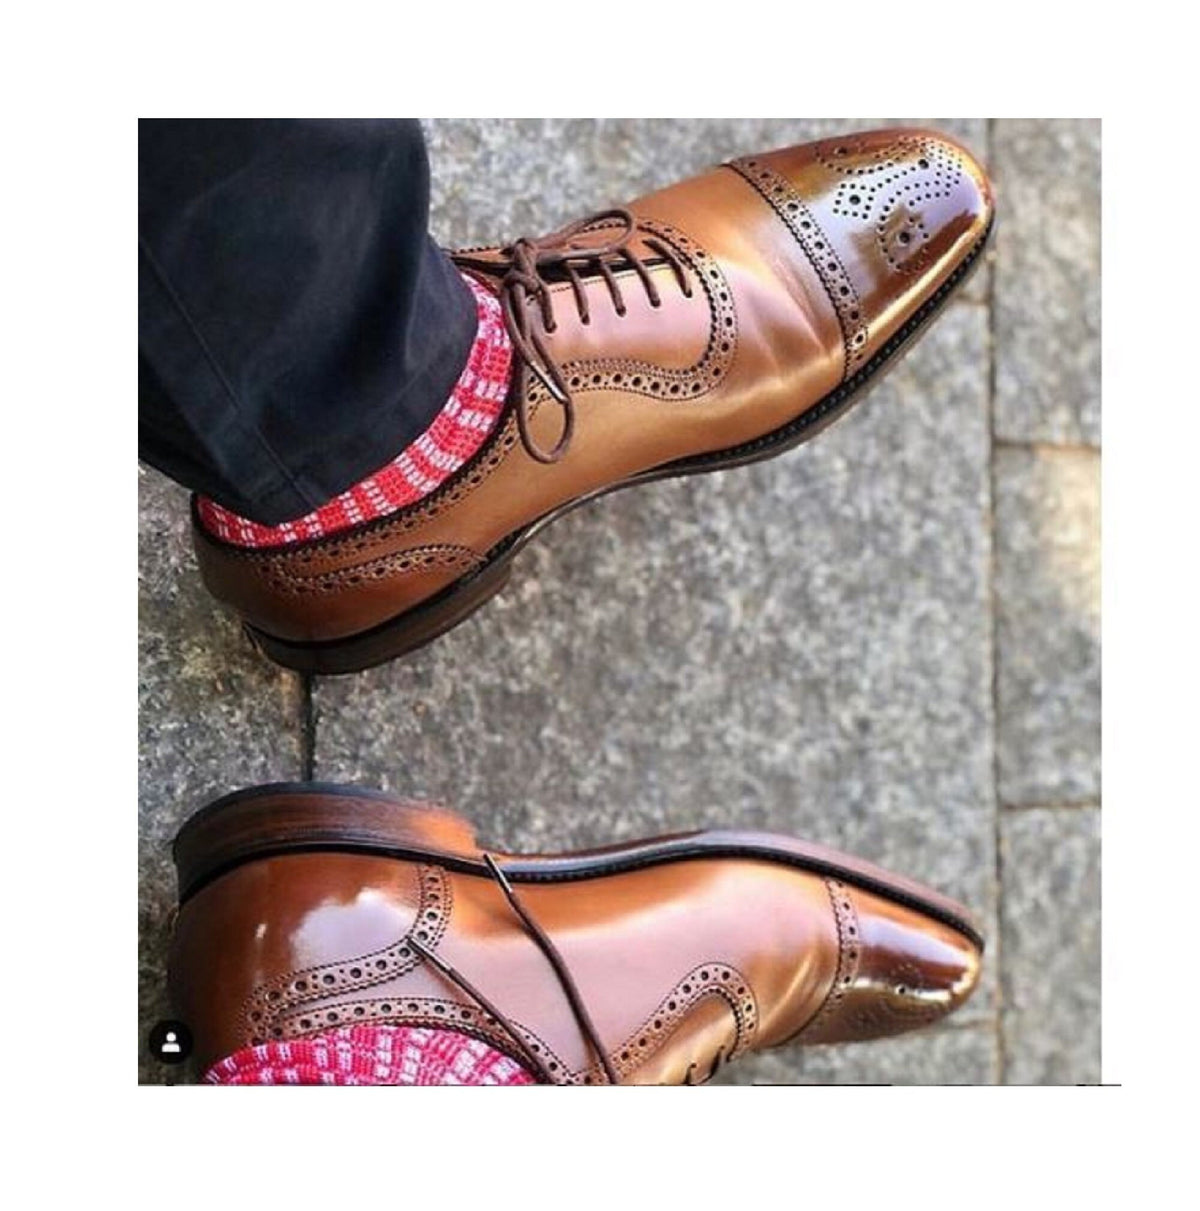 New Handmade Men's leather shoes, Oxford shoes, formal shoes, Men's Office shoes